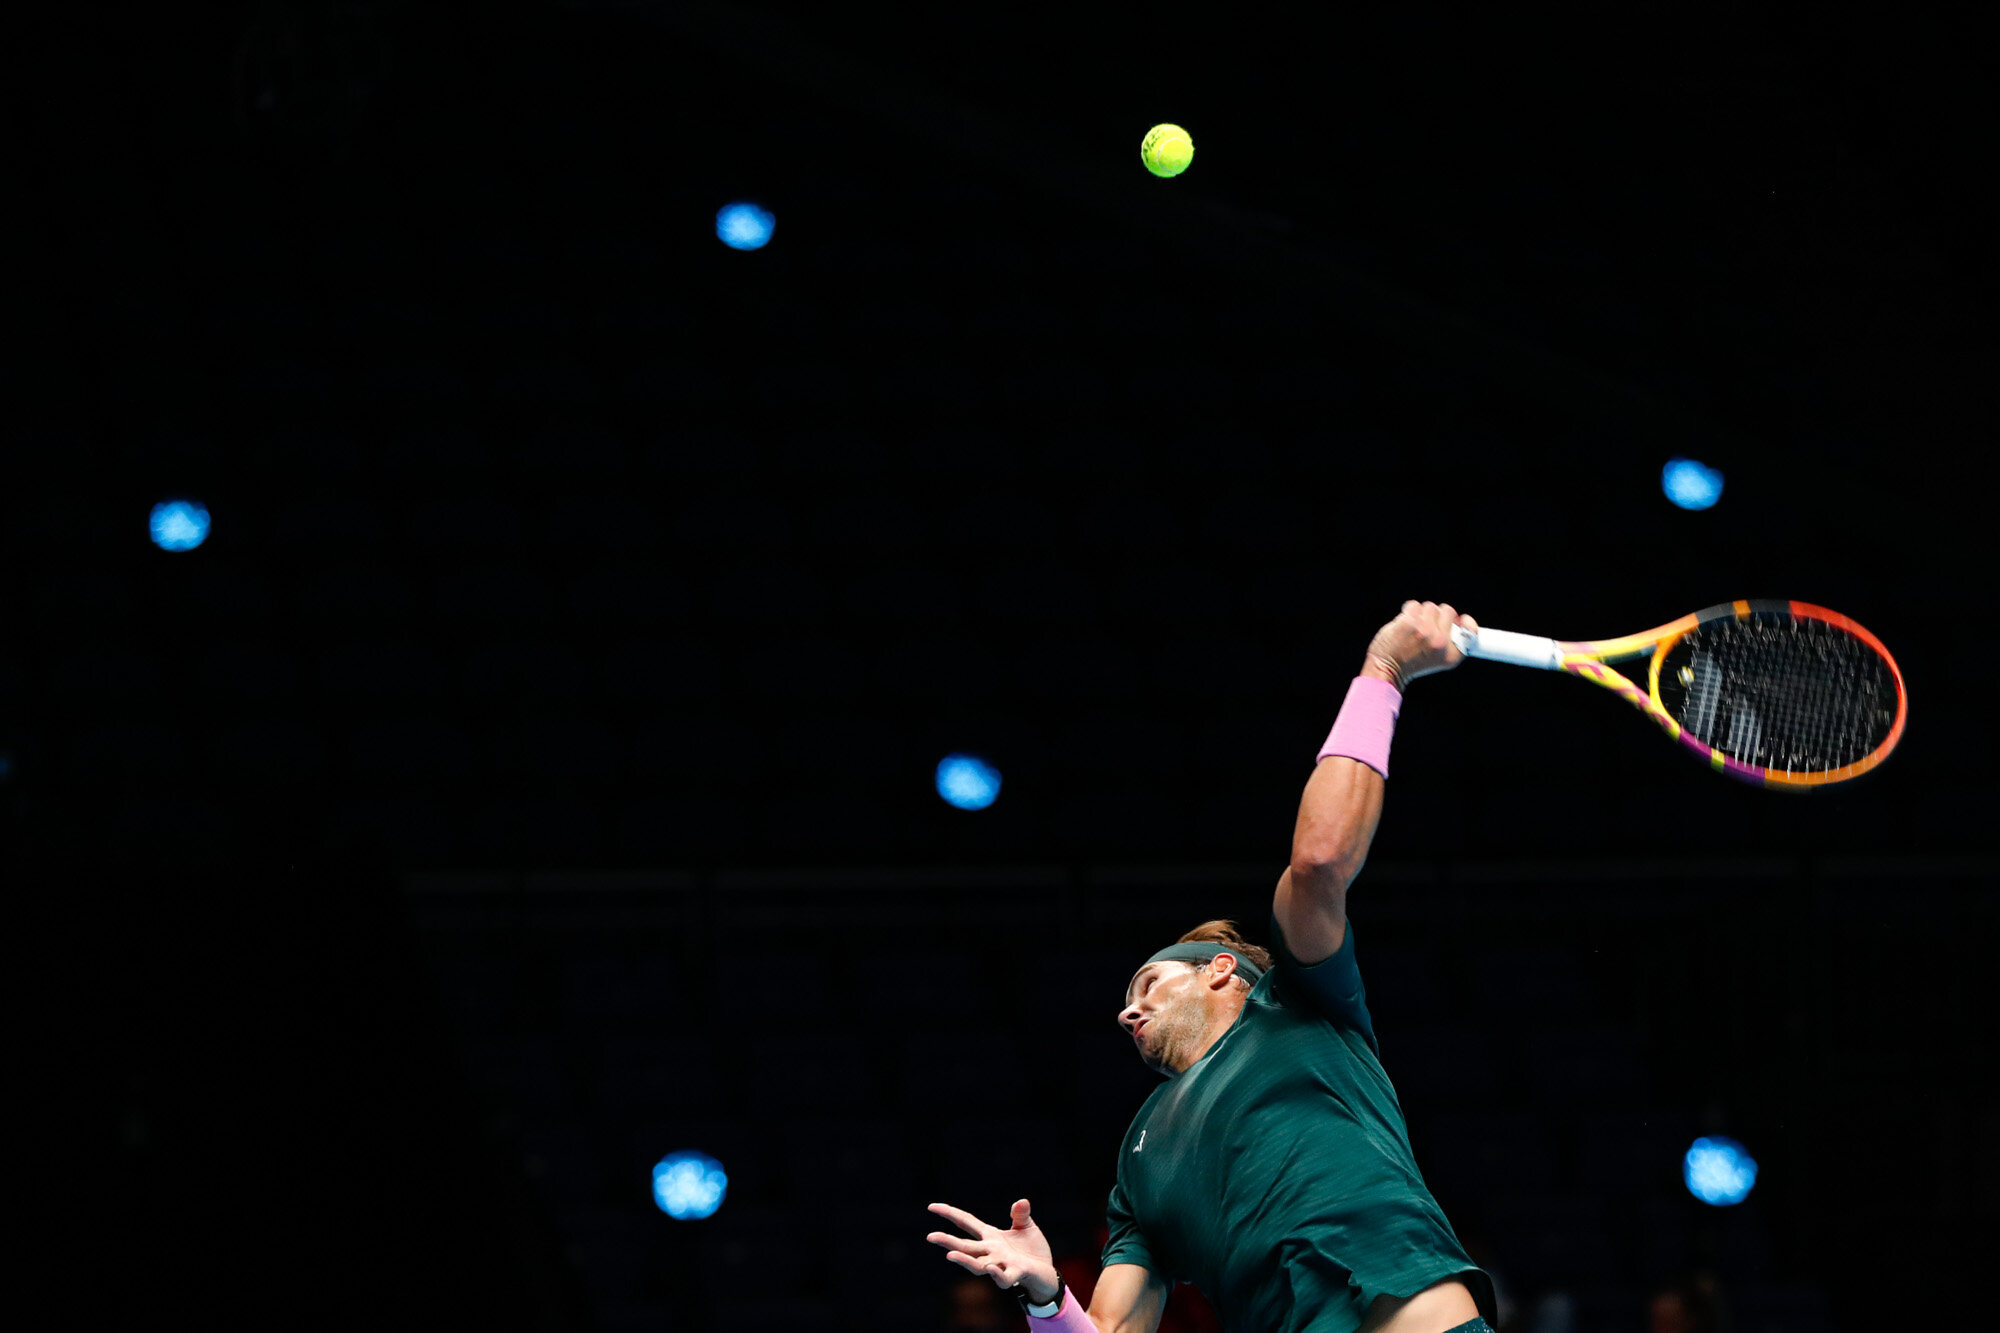  Rafael Nadal of Spain serves to Stefanos Tsitsipas of Greece during their tennis match at the ATP World Finals tennis tournament at the O2 arena in London on Nov. 19, 2020. (AP Photo/Frank Augstein) 